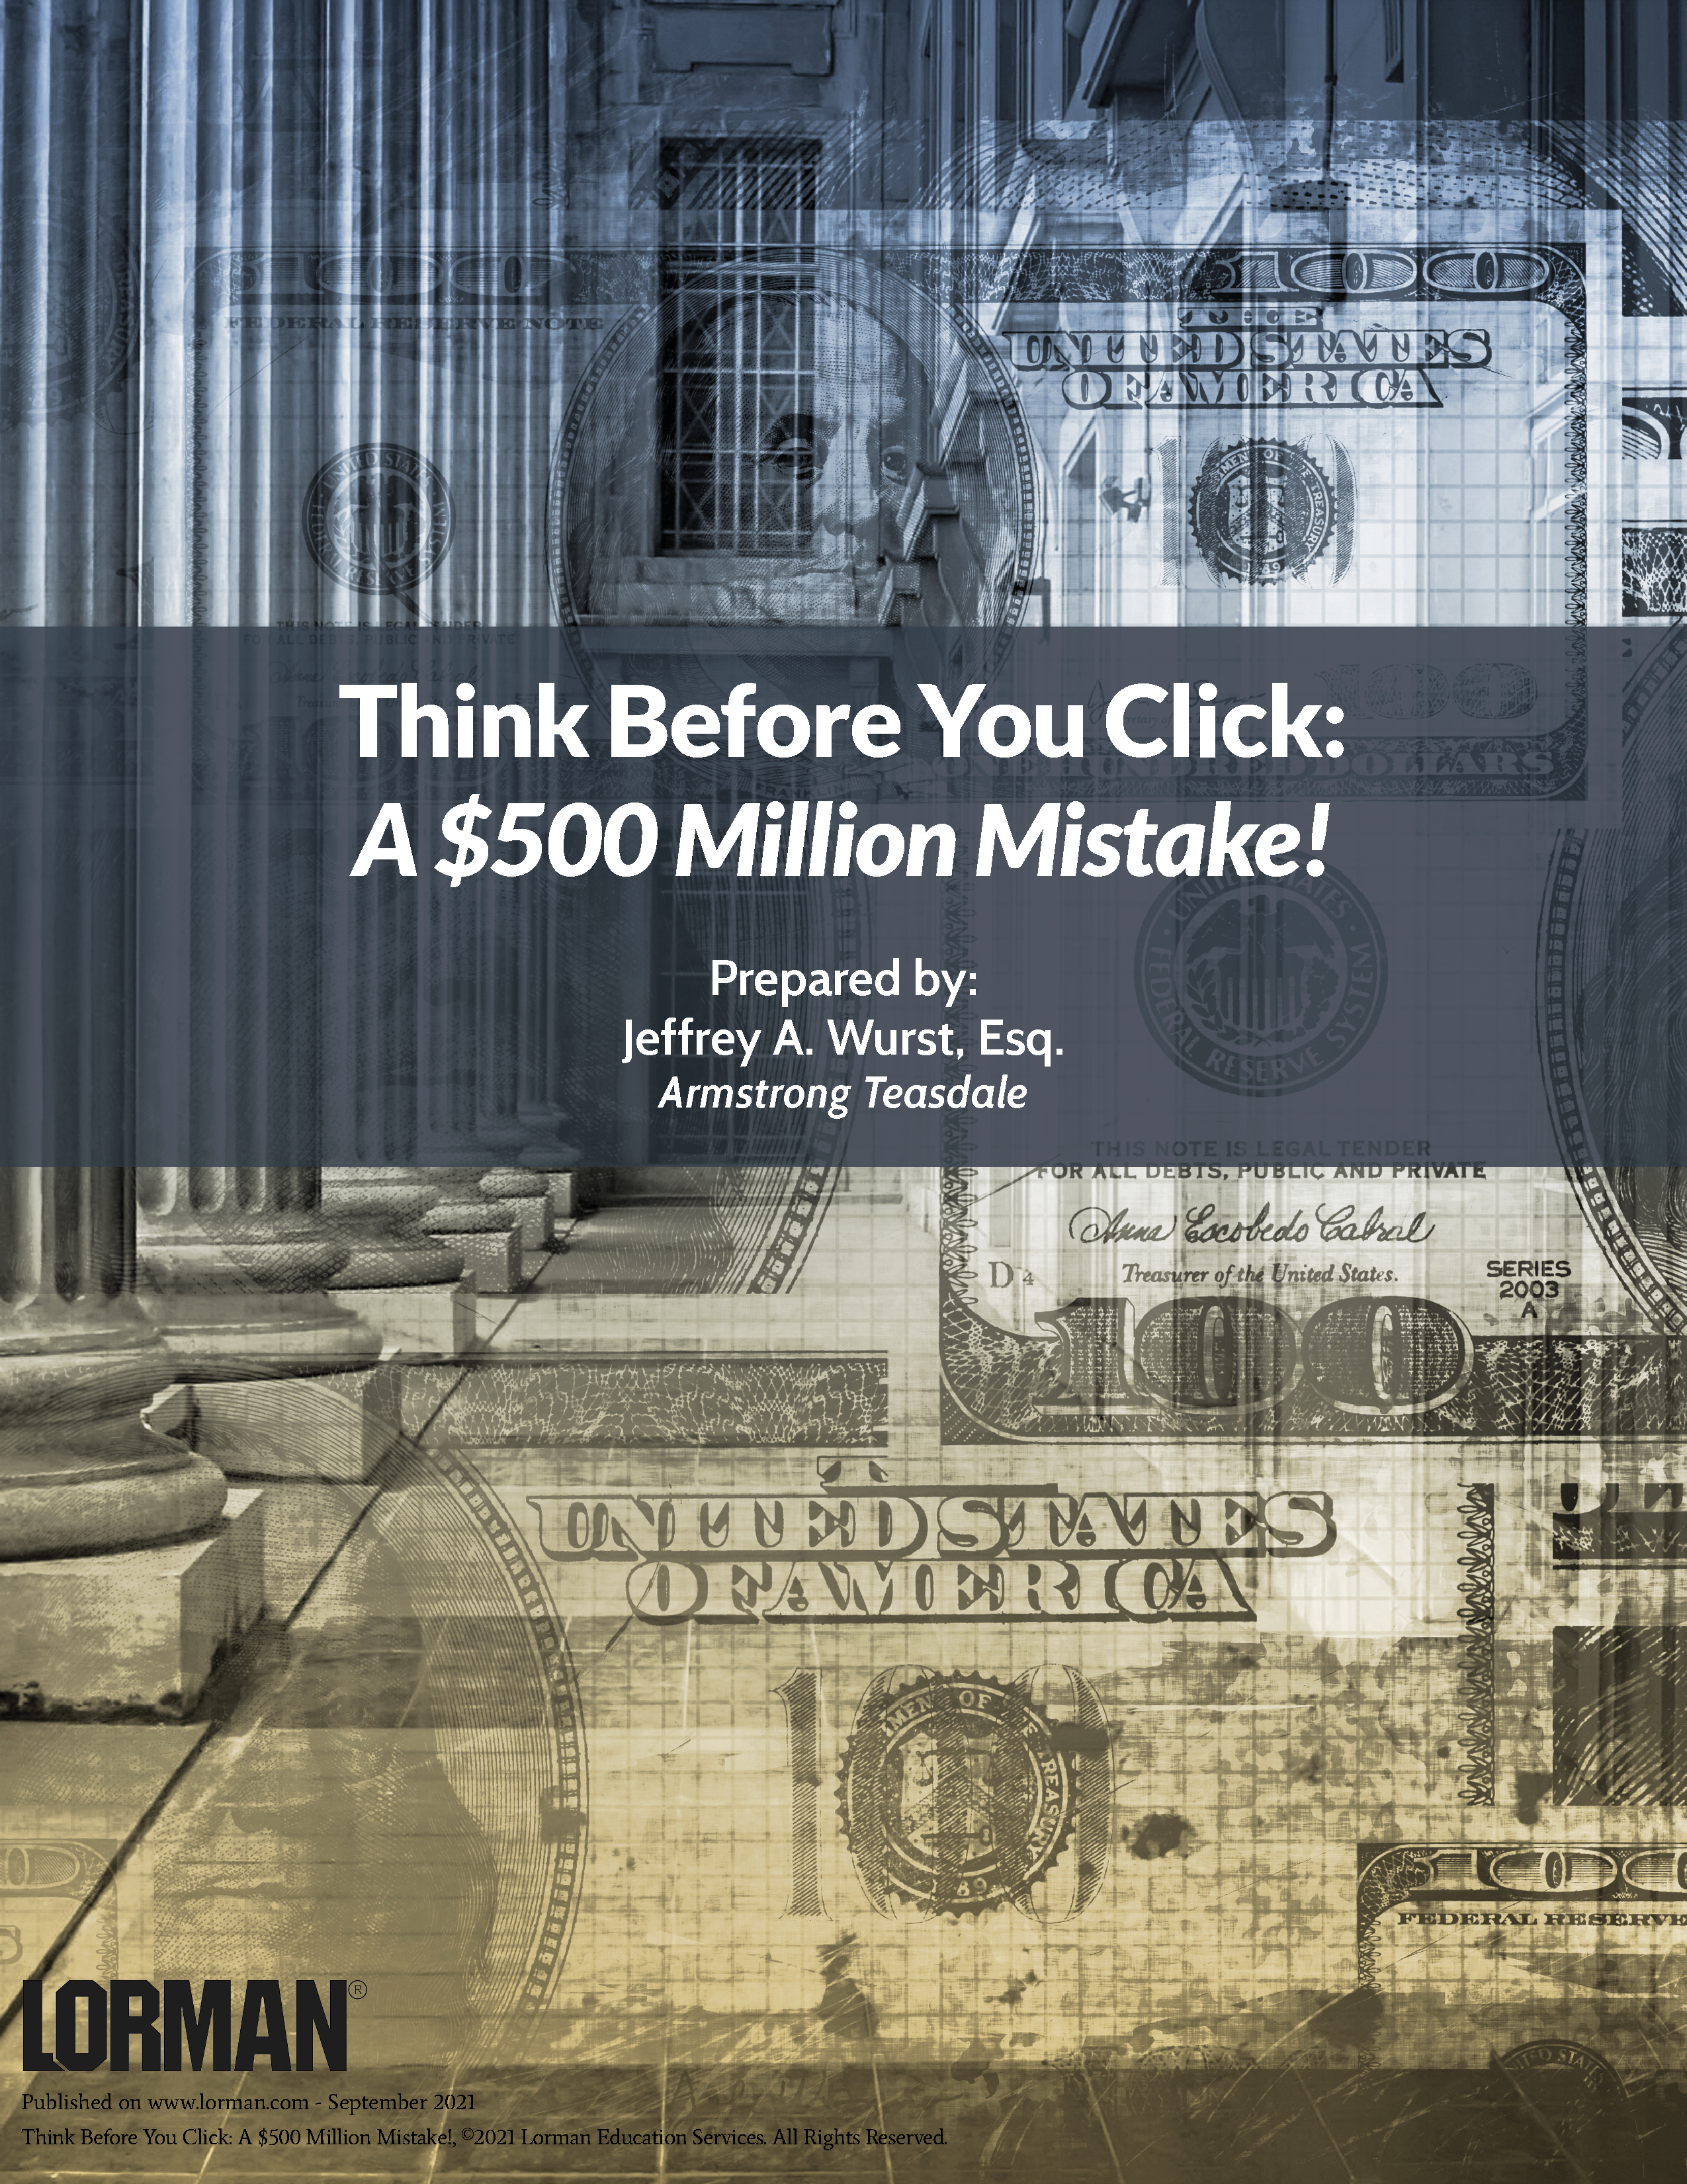 Think Before You Click: A $500 Million Mistake